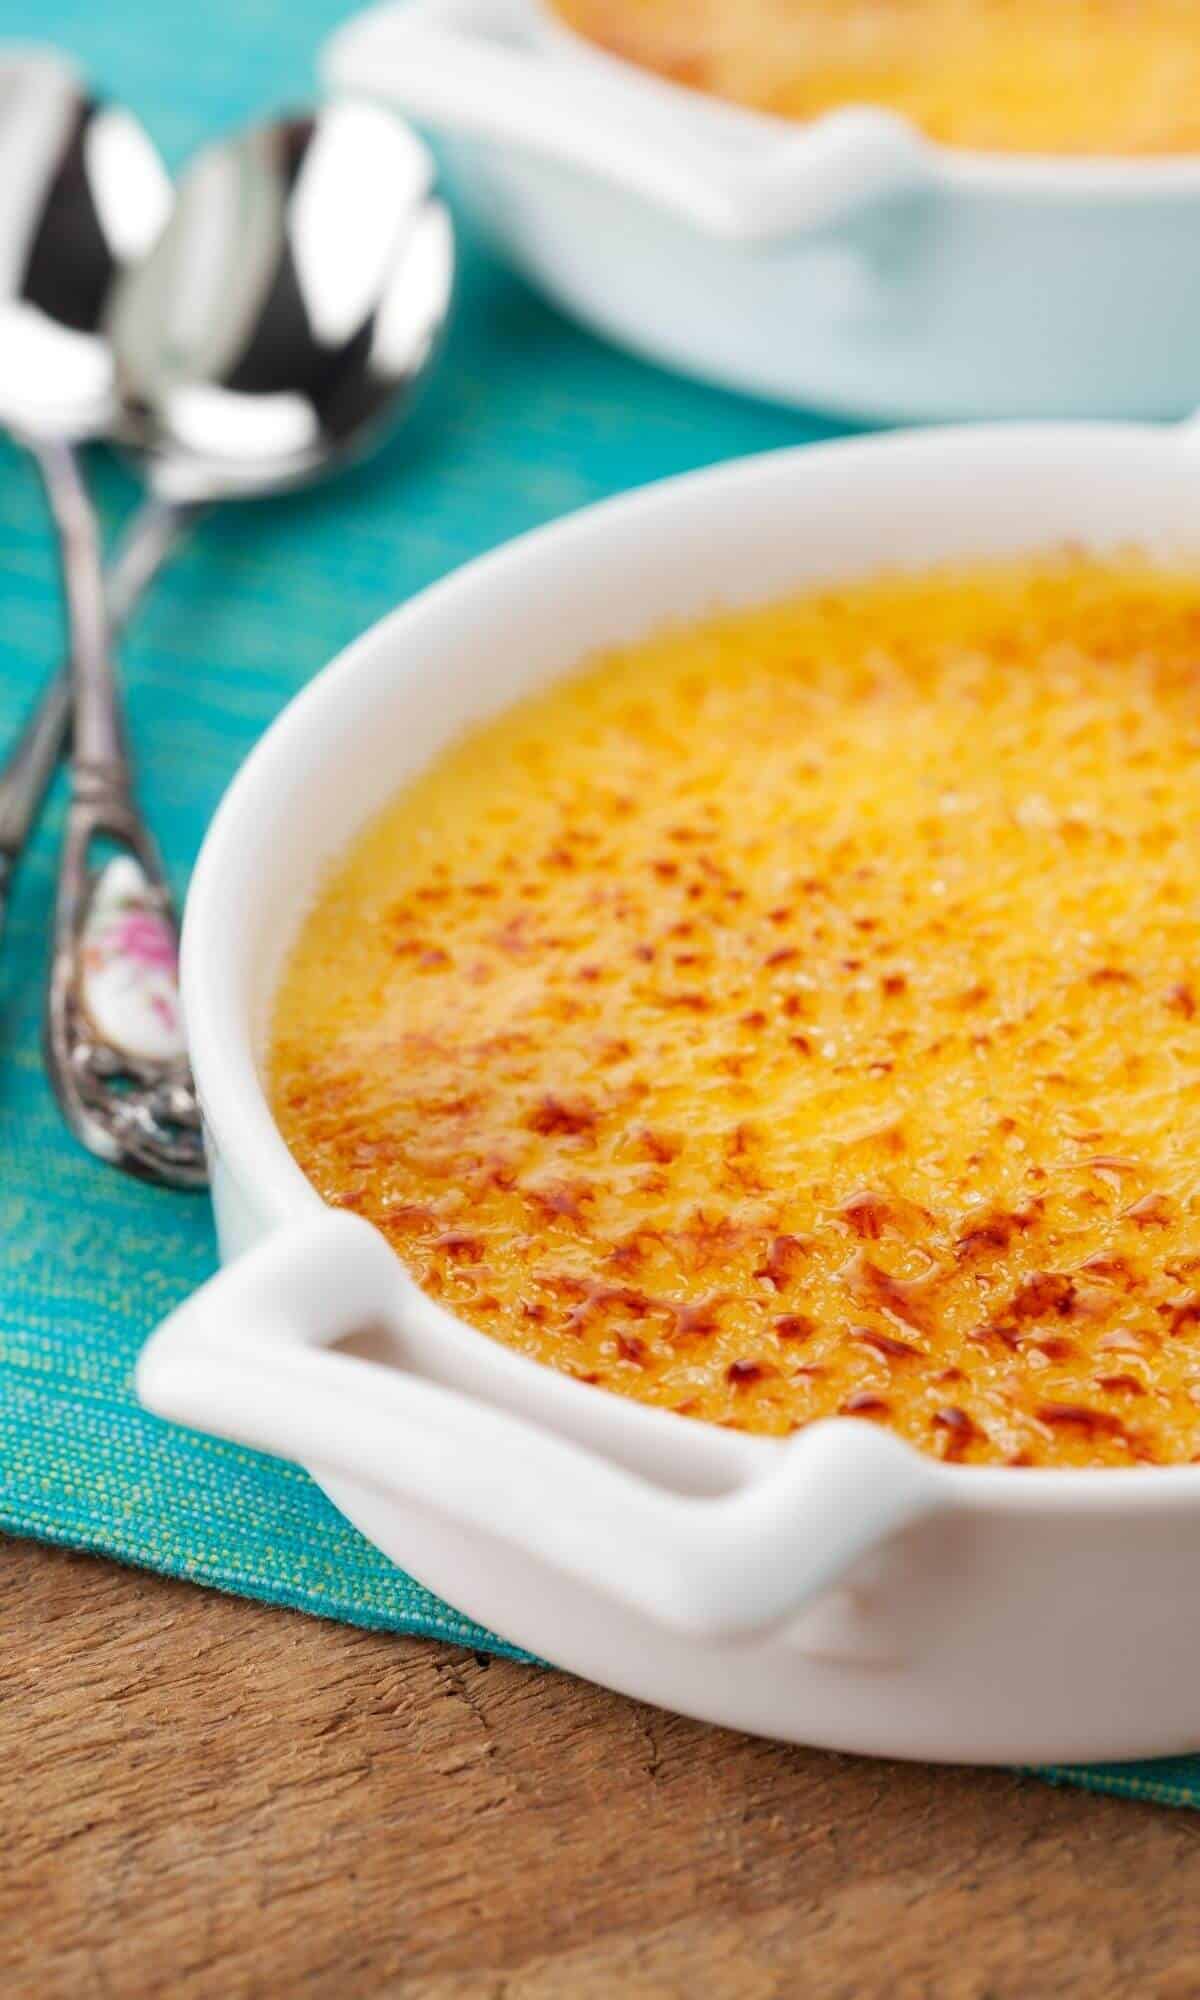 Creme brulee in white dish on table.